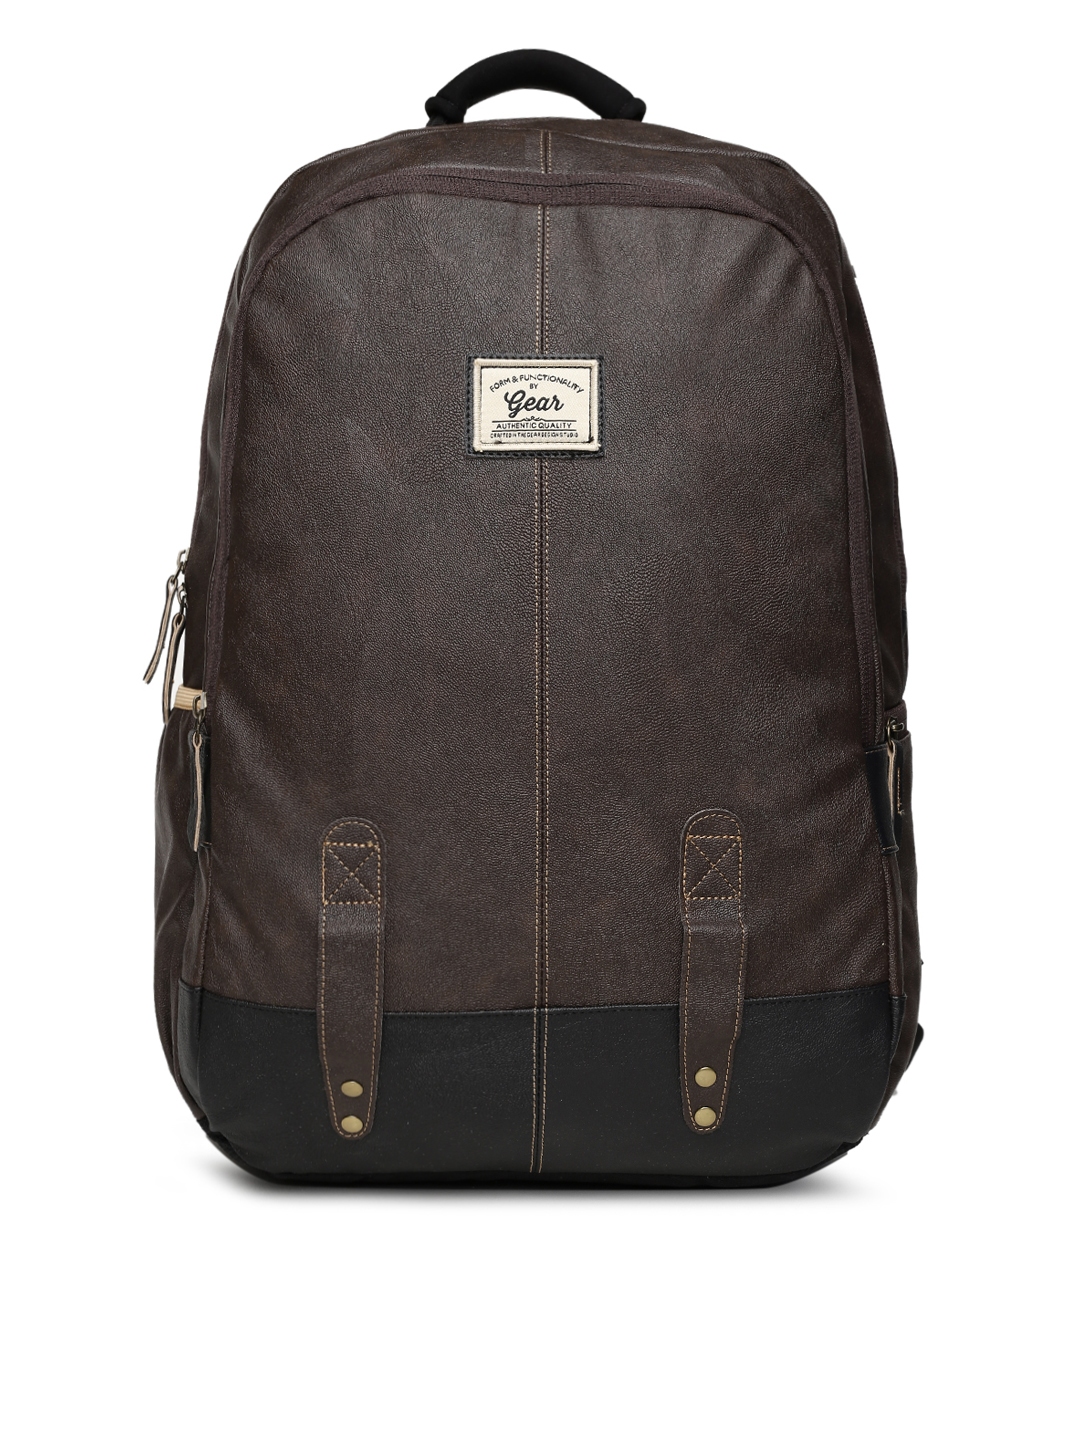 Gear Unisex Brown Faux Leather Solid Backpack 8246779.htm - Buy